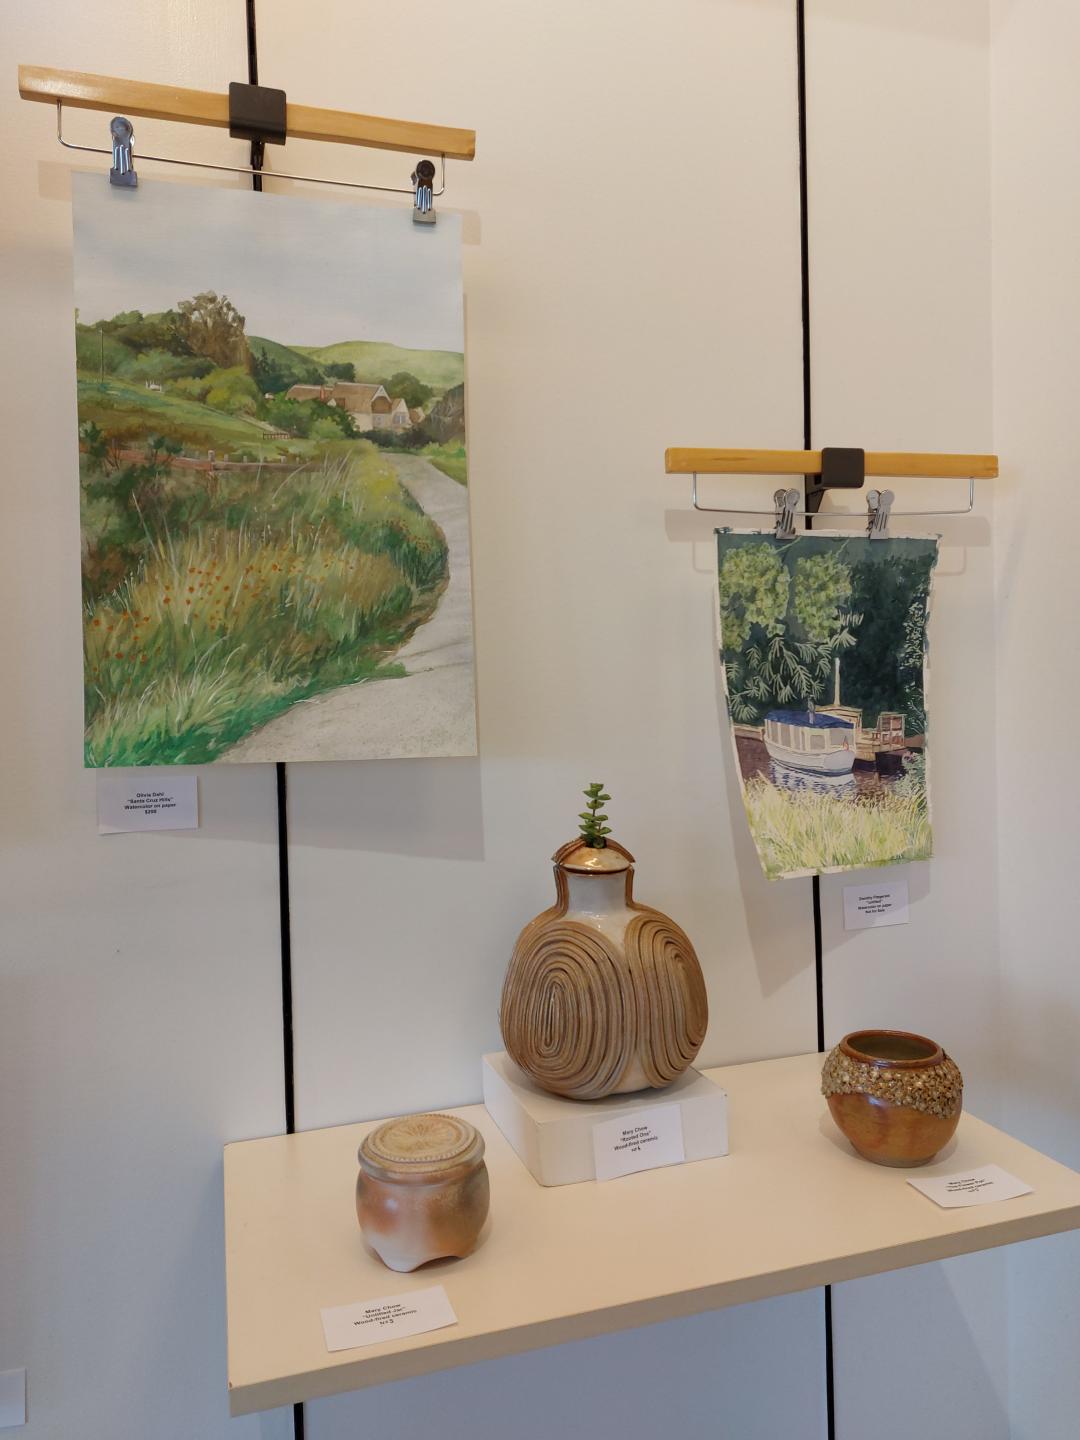 Ceramics and paintings made by ACC students on display at Aspen Grove in Littleton, Colorado.